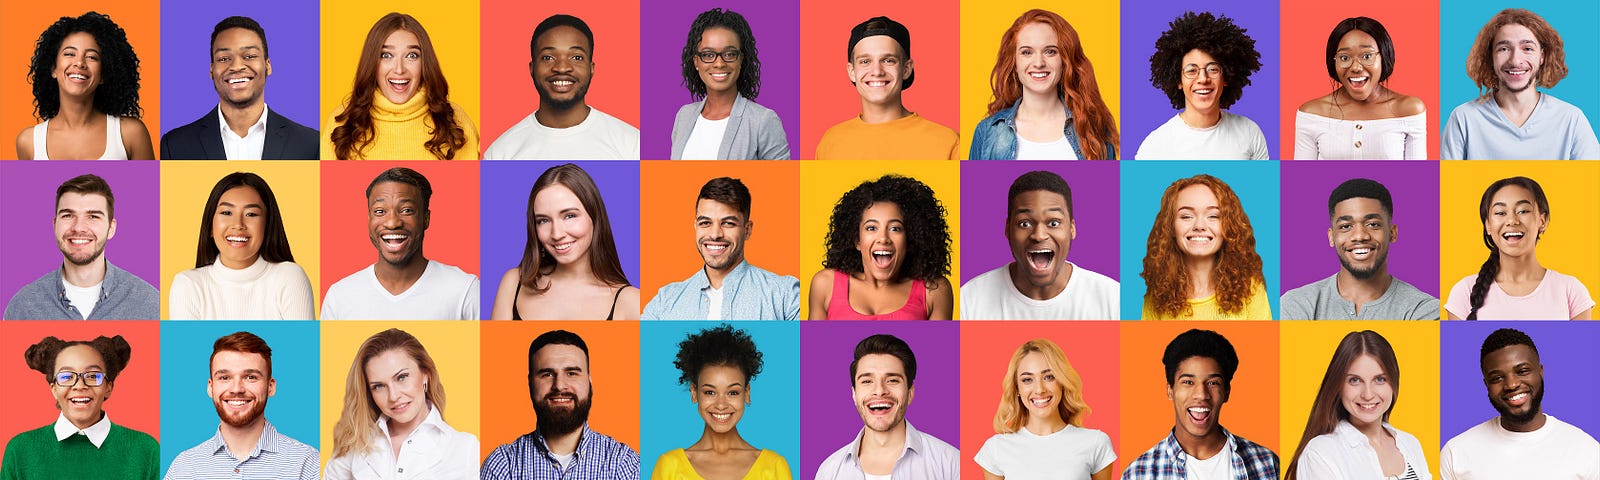 Set Of Positive People Portraits Posing Over Bright Backgrounds